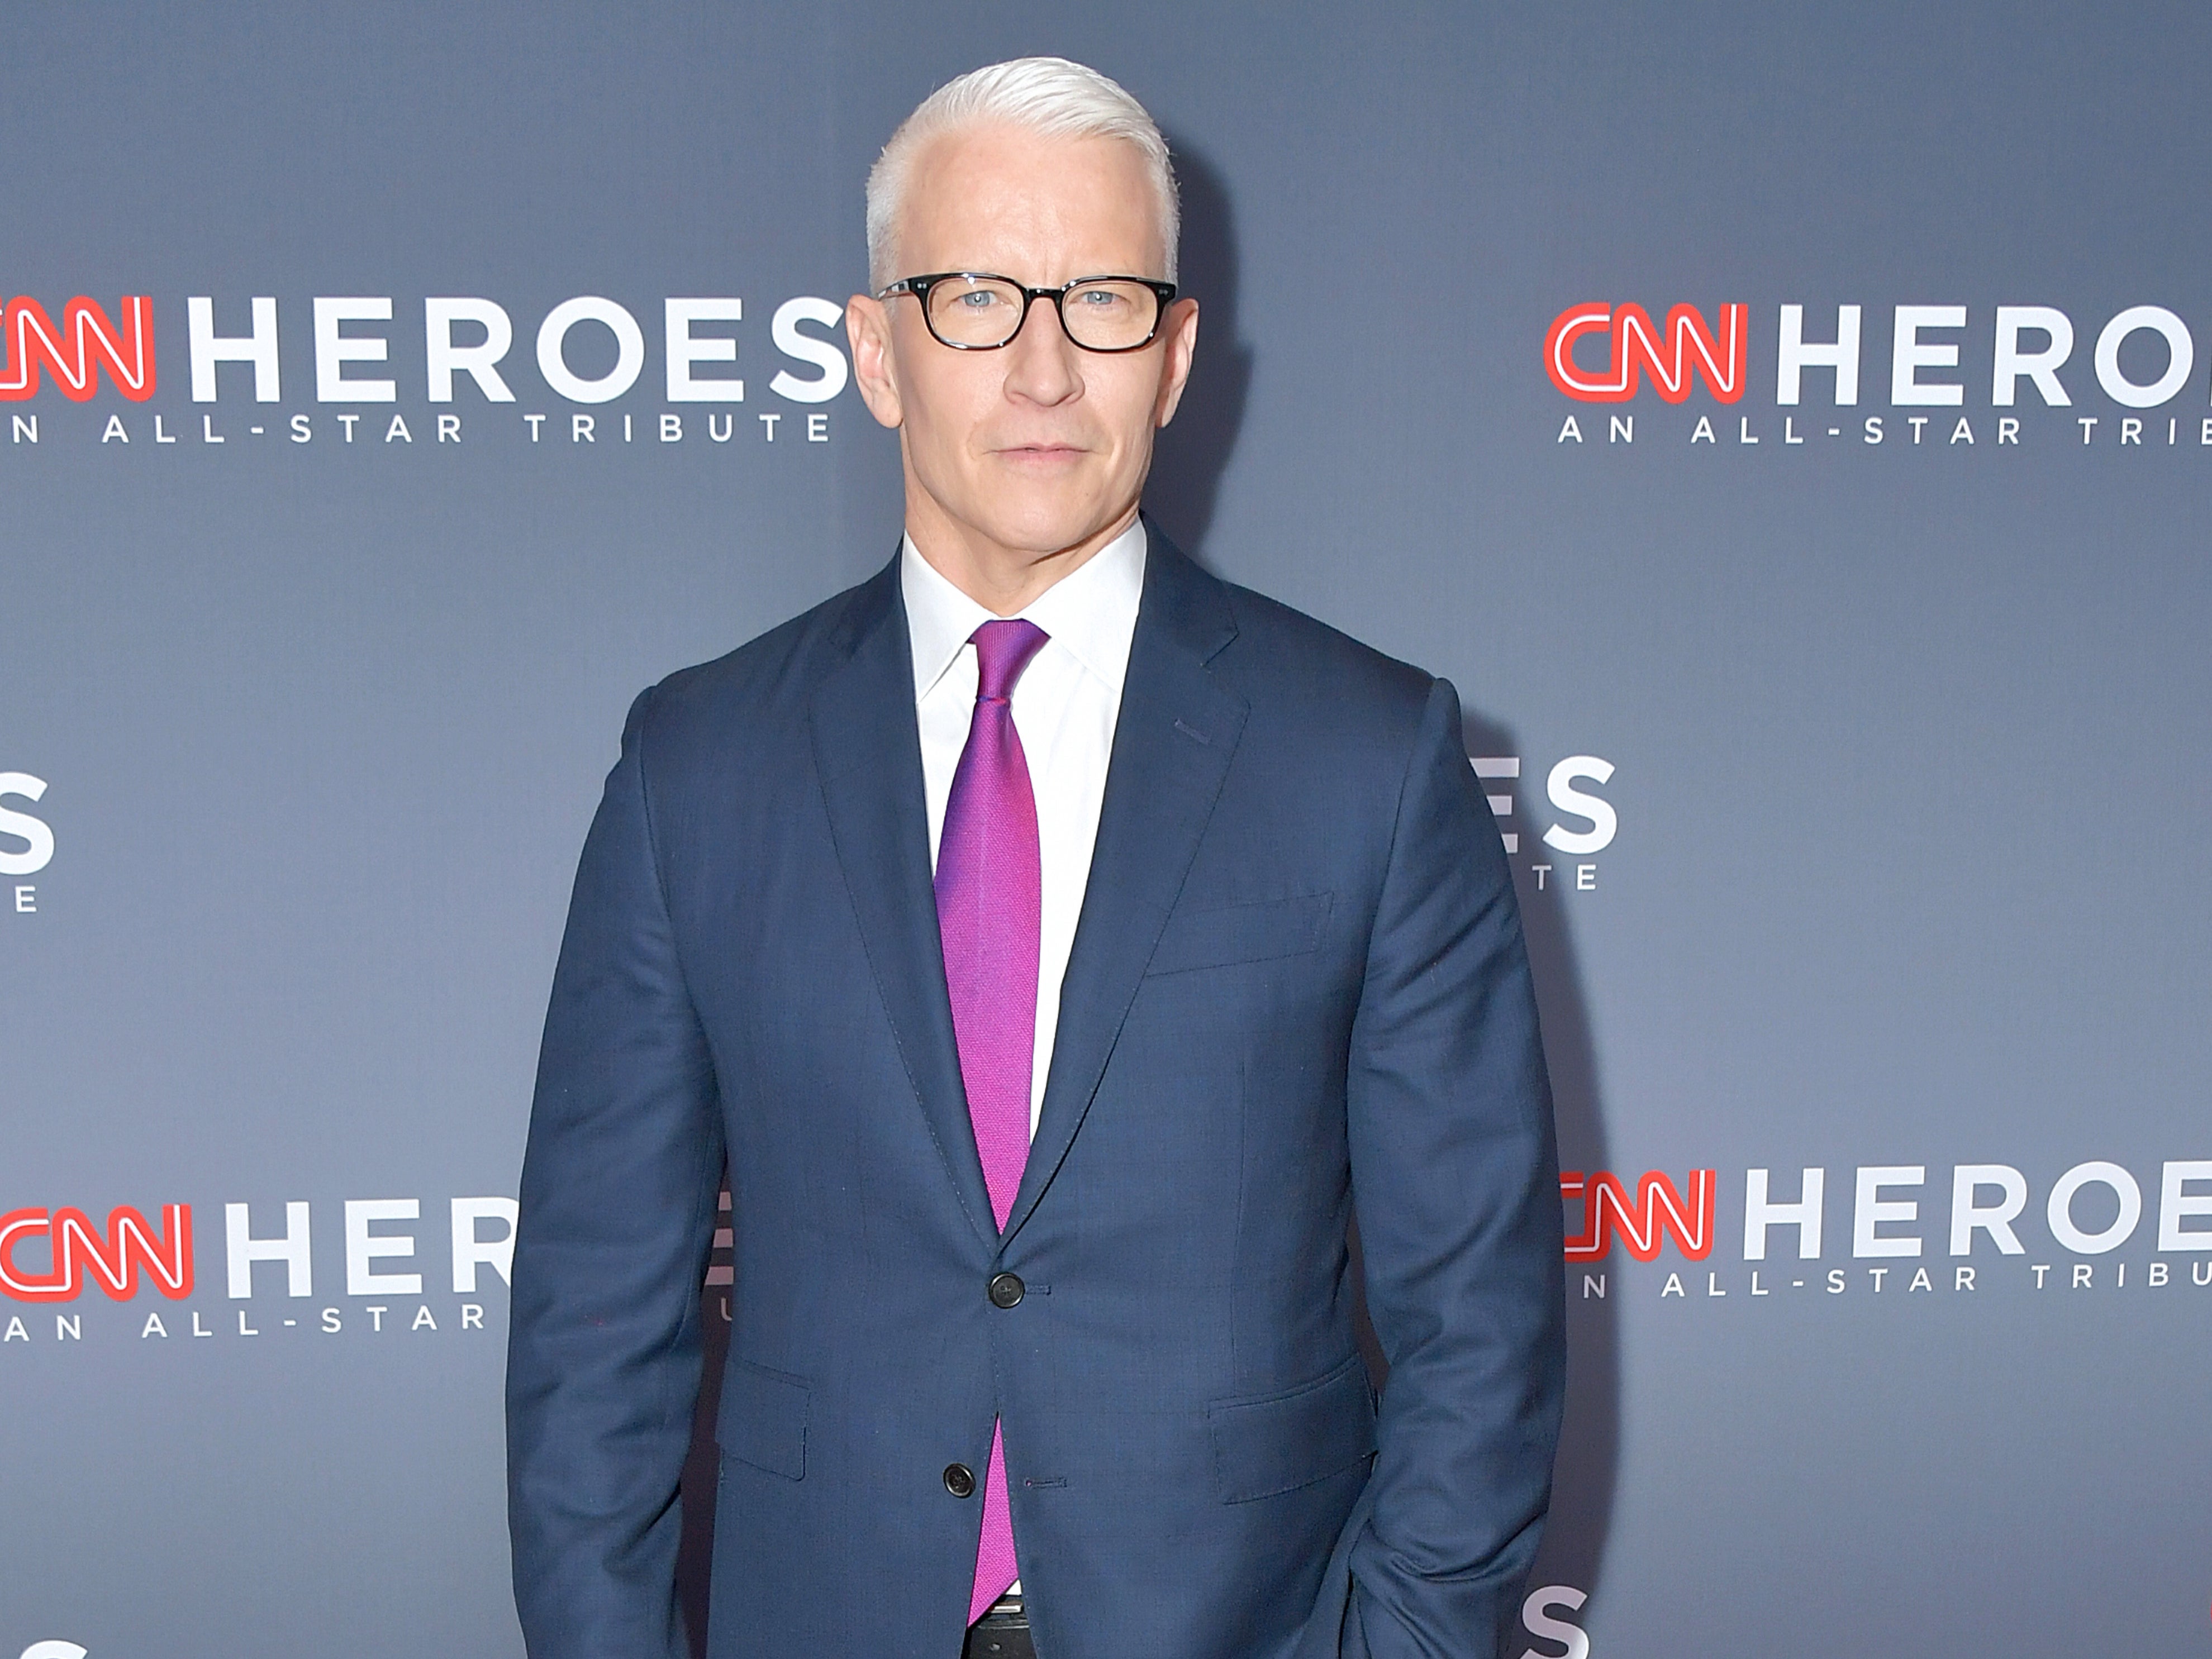 Anderson cooper gay or not